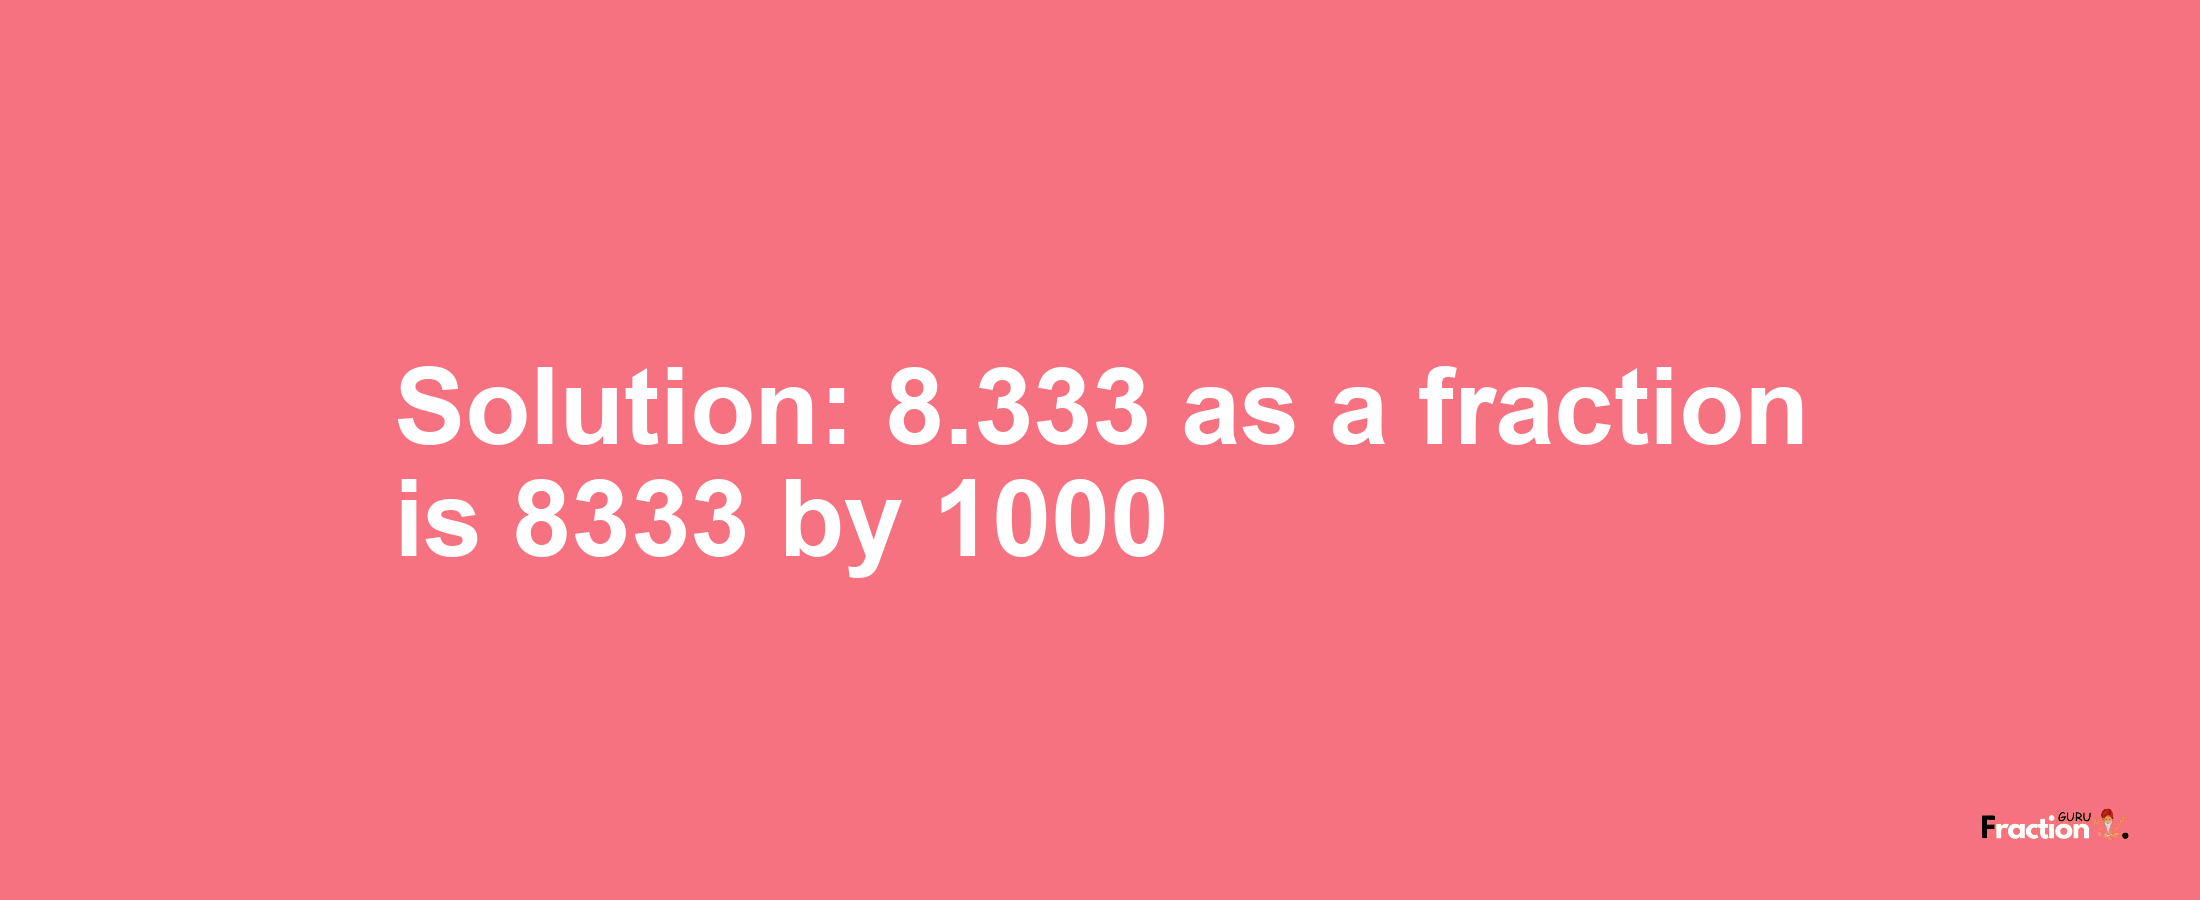 Solution:8.333 as a fraction is 8333/1000